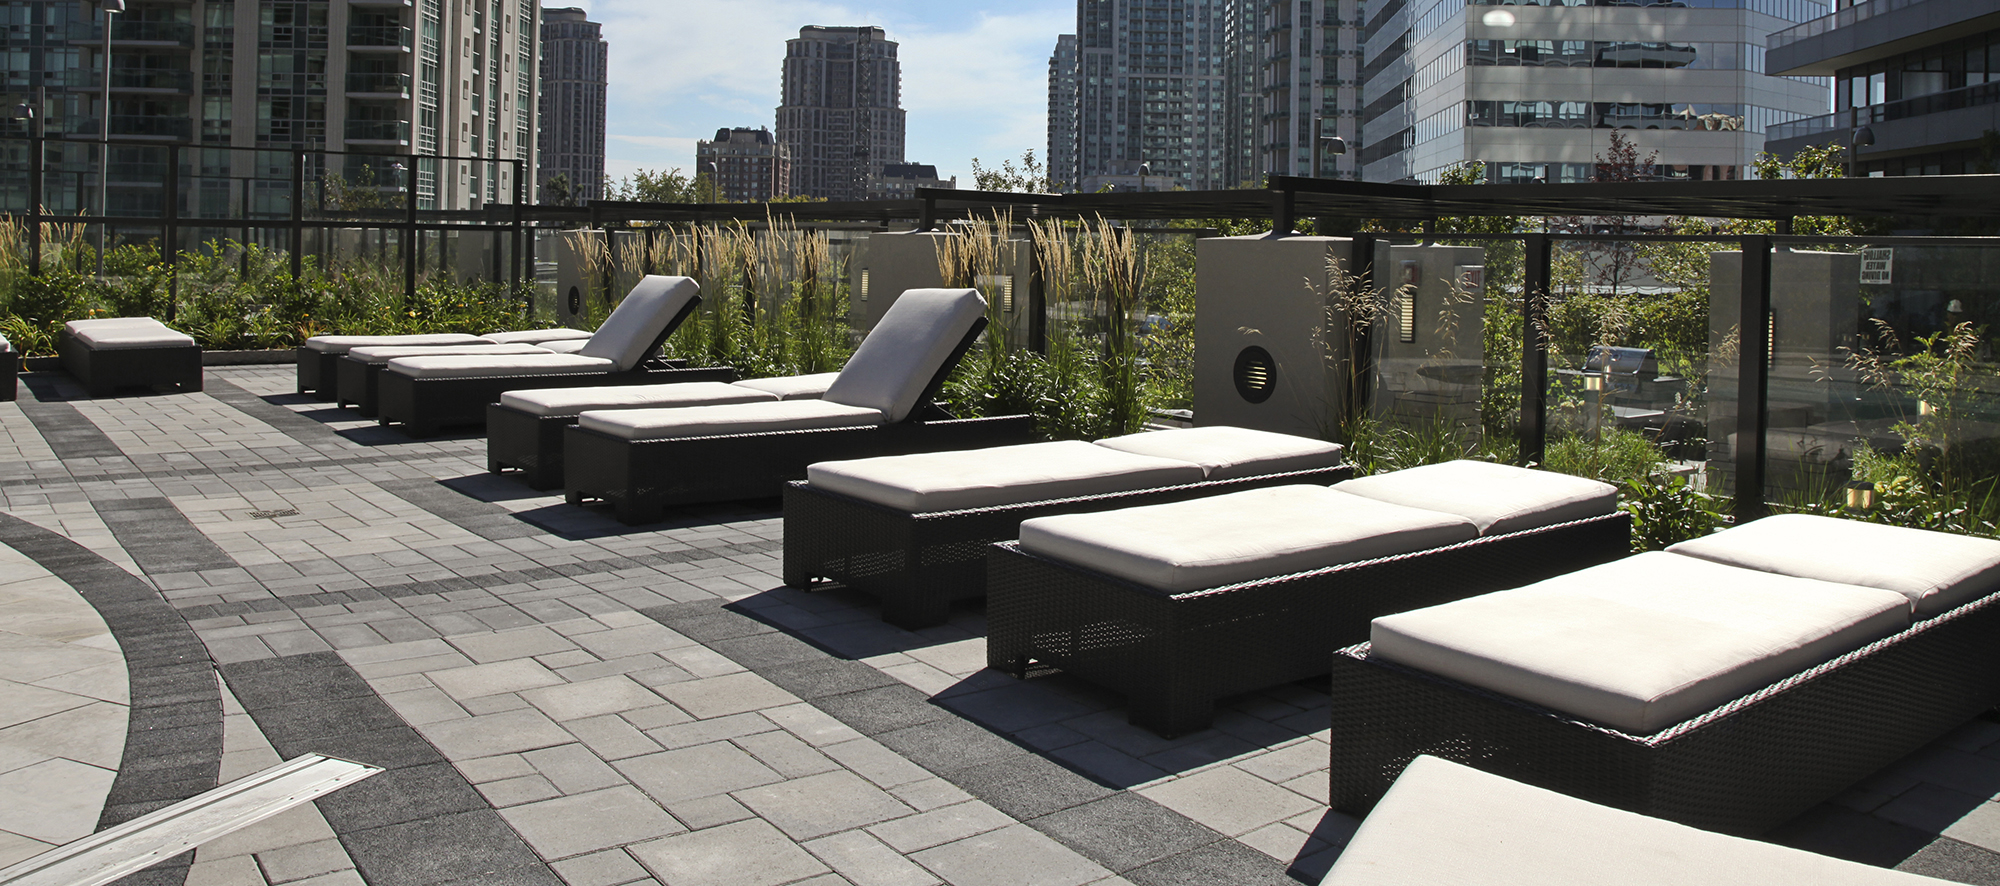 Lounge chairs sit within the borders of black Europaver, intersected by grey Series to create a decorative paver rug on the pool deck.